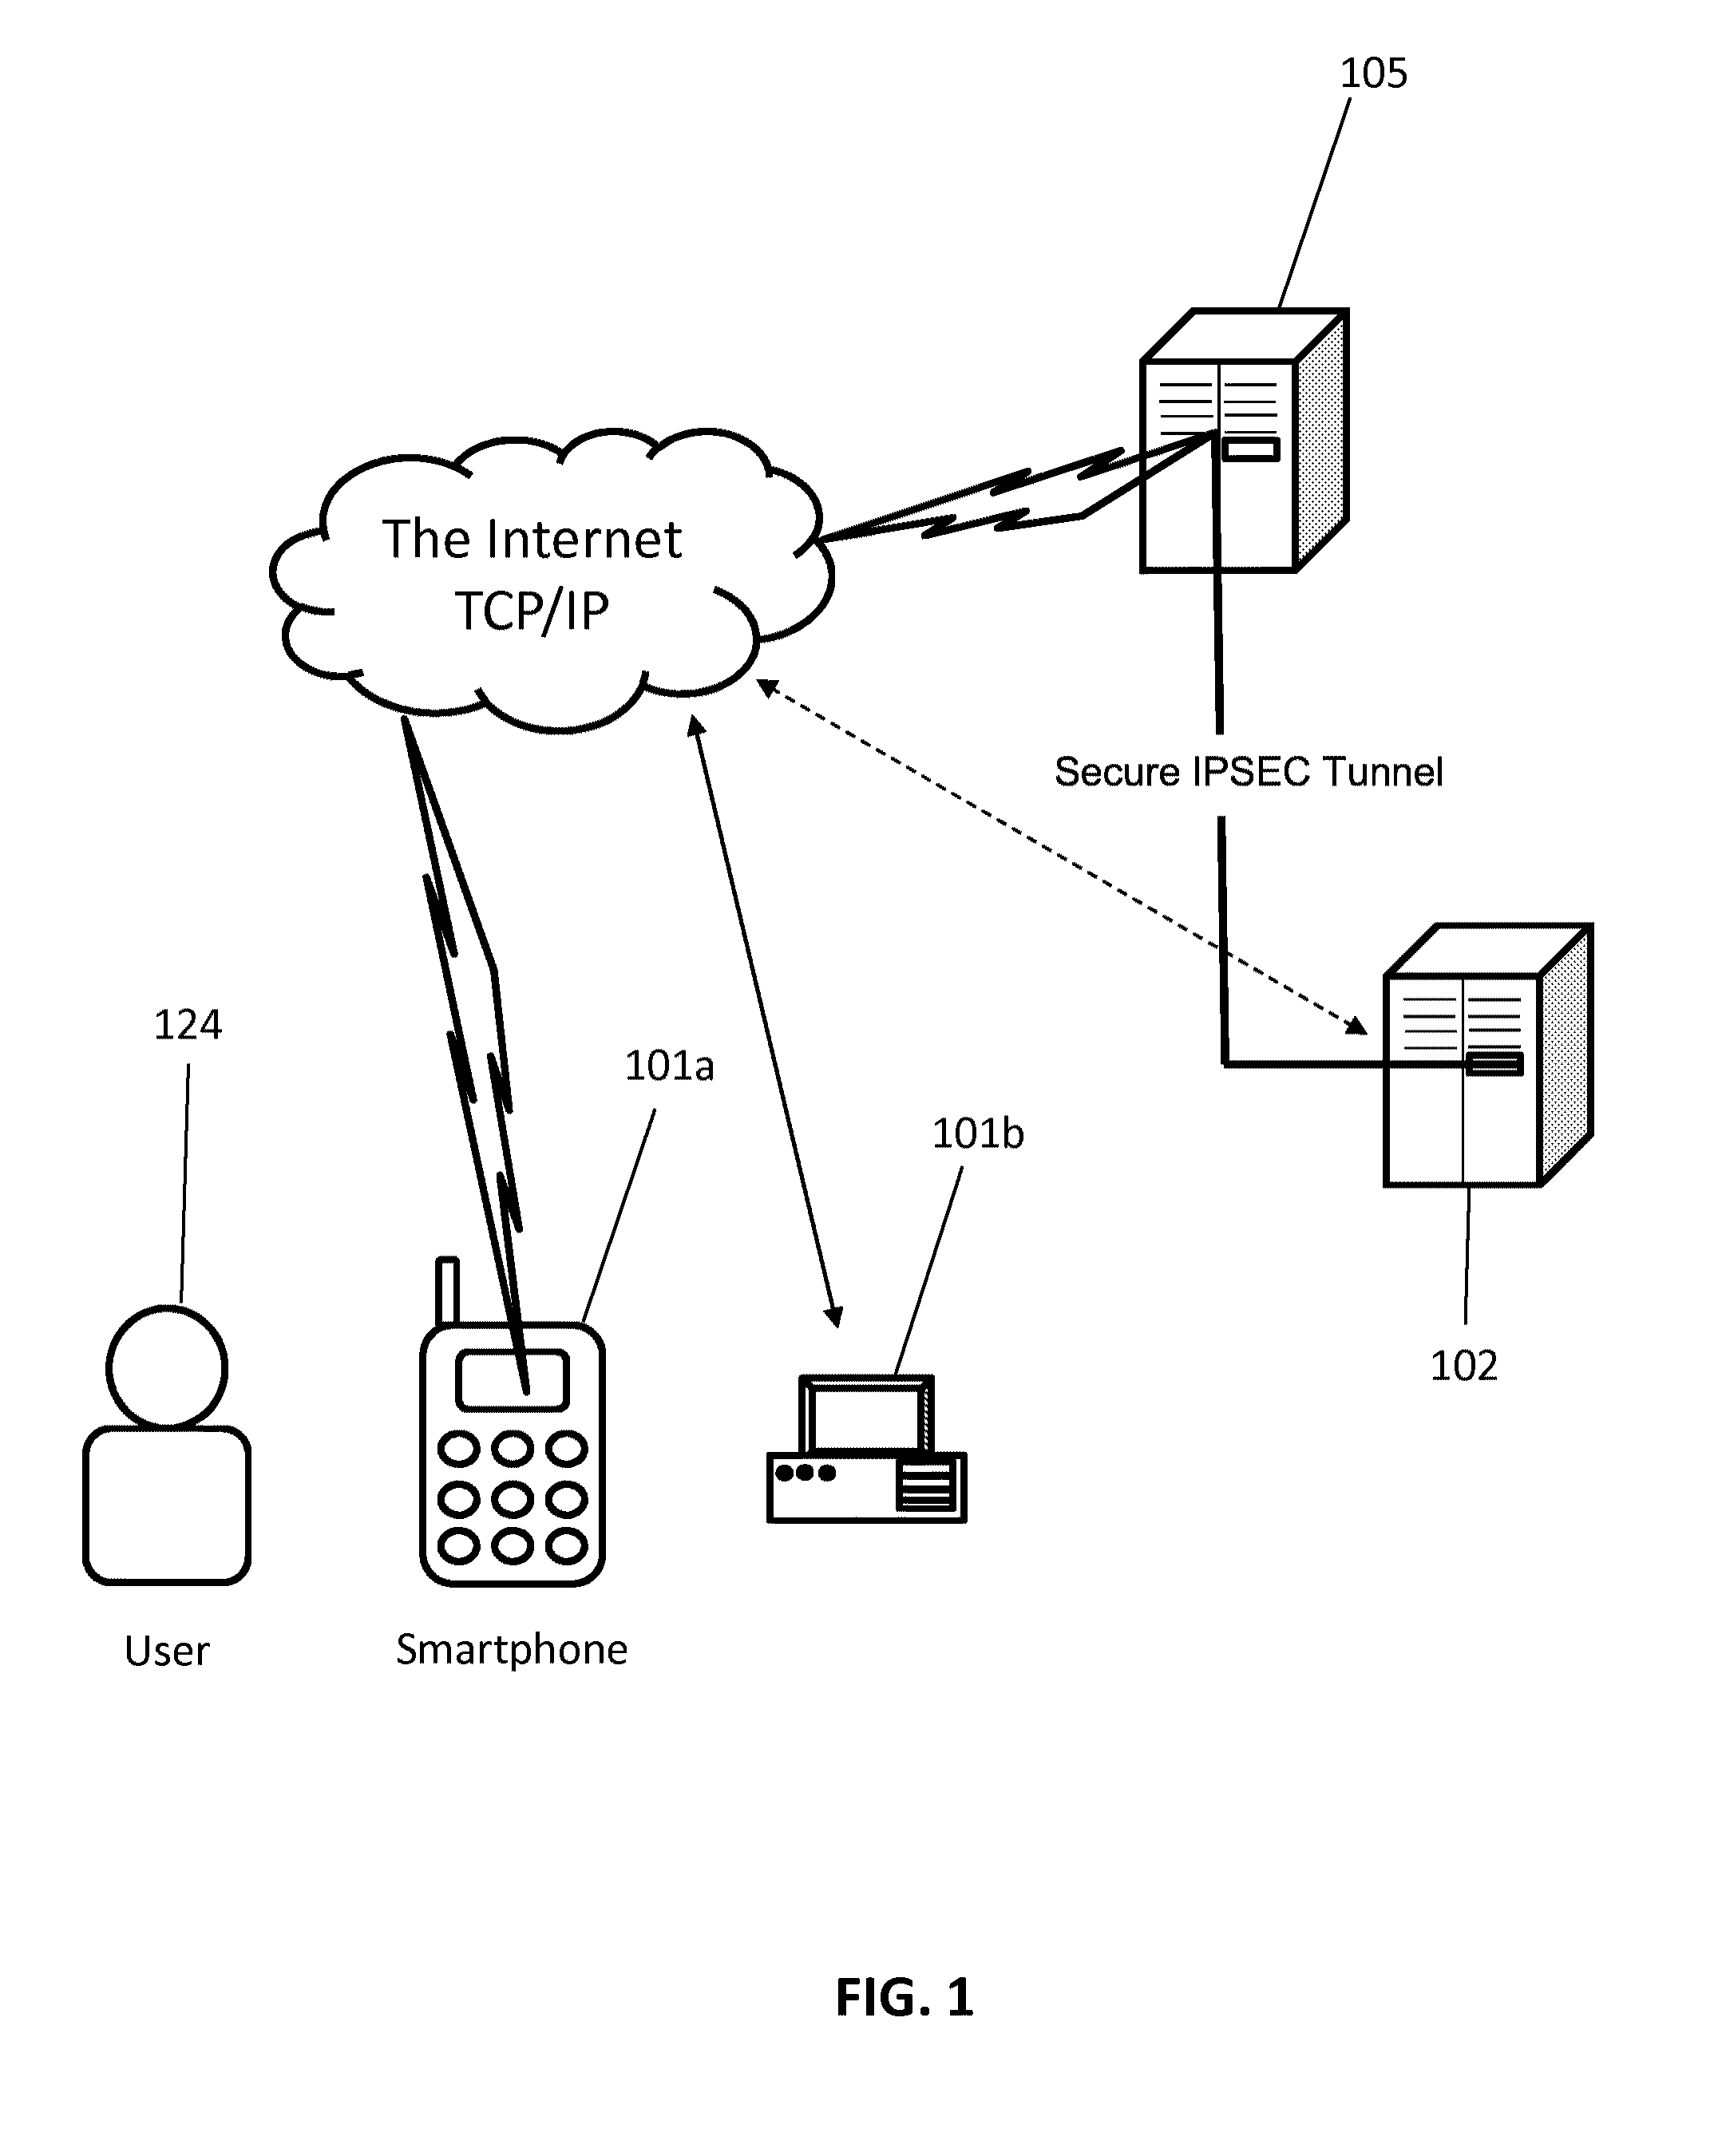 Systems and methods for performing iris identification and verification using mobile devices